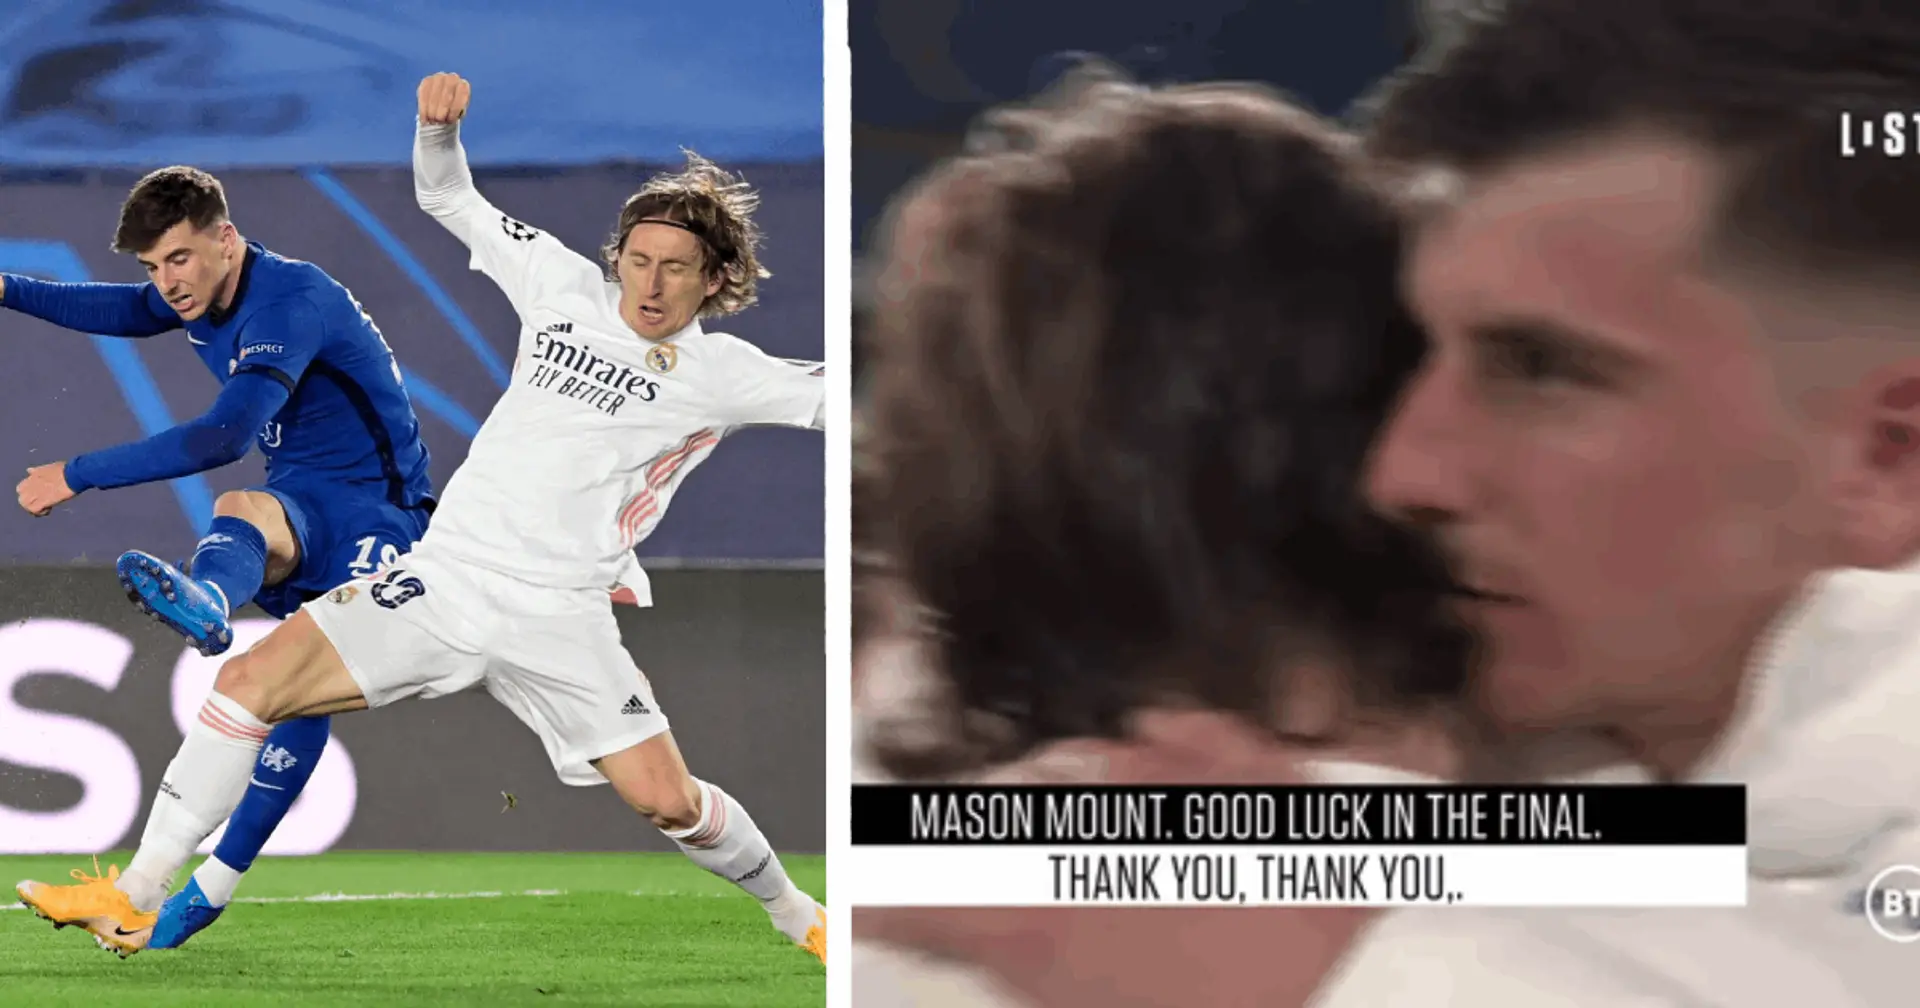 'He has always been a player I have looked up to': Mount reveals he idolised Modric, explains how he uses it to his advantage